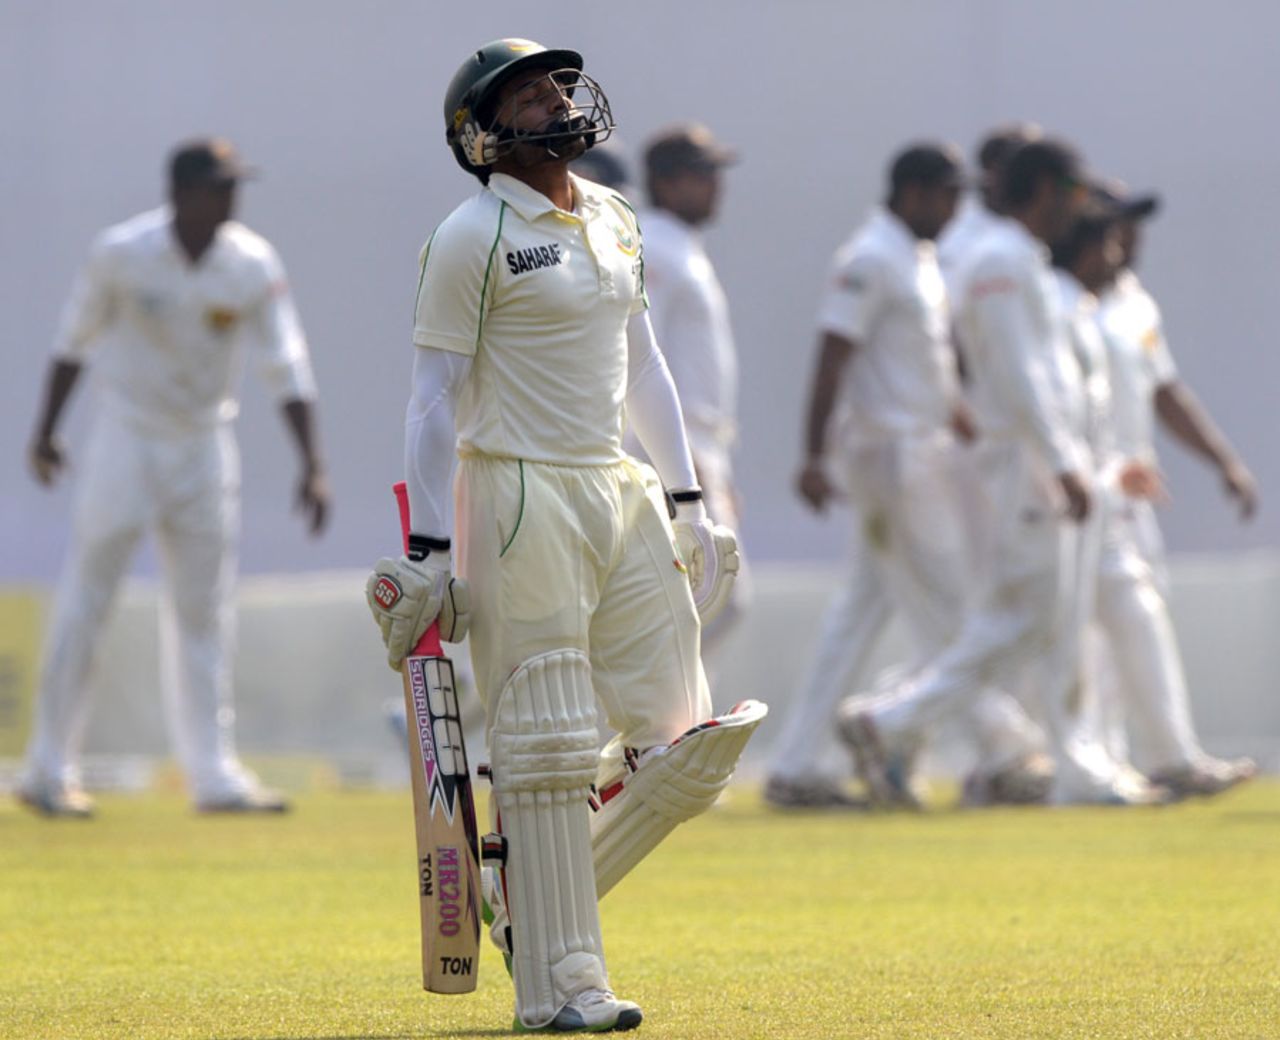 Mushfiqur Rahim looks to the heavens after being given out, Bangladesh v Sri Lanka, 1st Test, Mirpur, 4th day, January 30, 2014